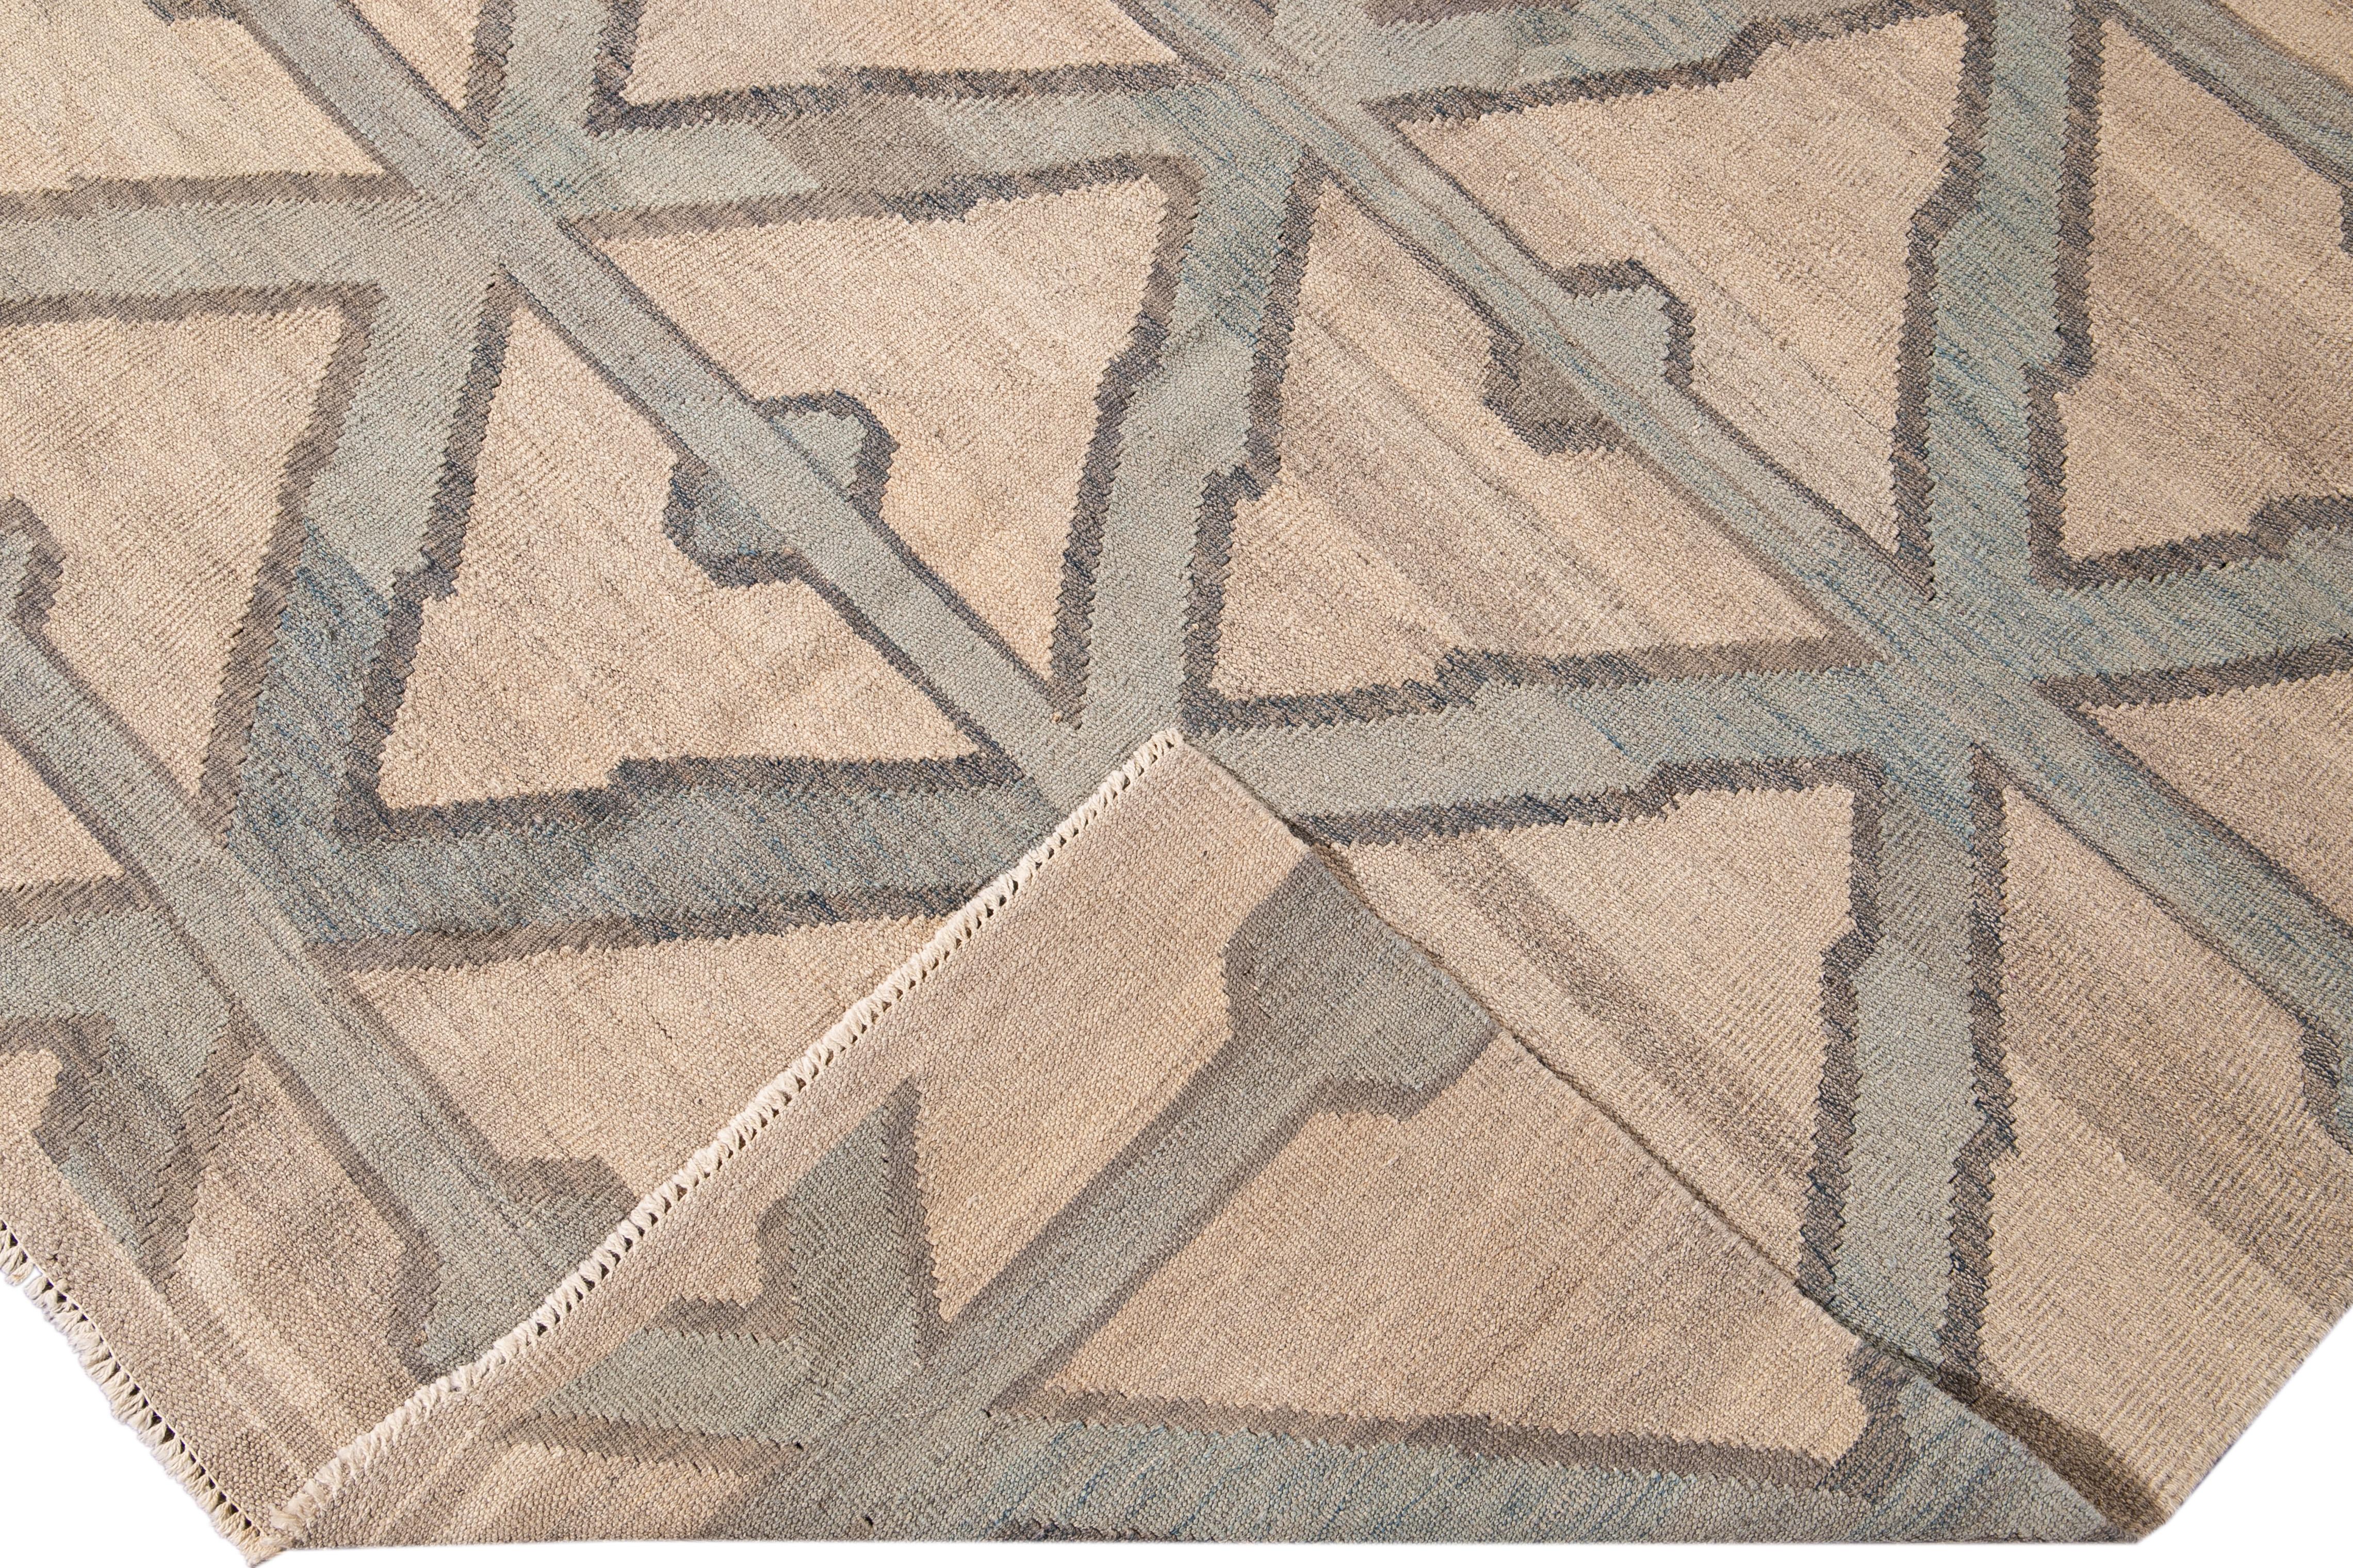 Beautiful modern Kilim flat-weave wool rug with a beige field. This piece of art has green and gray accents in a gorgeous geometric diamond pattern design.

This rug measures: 7'10